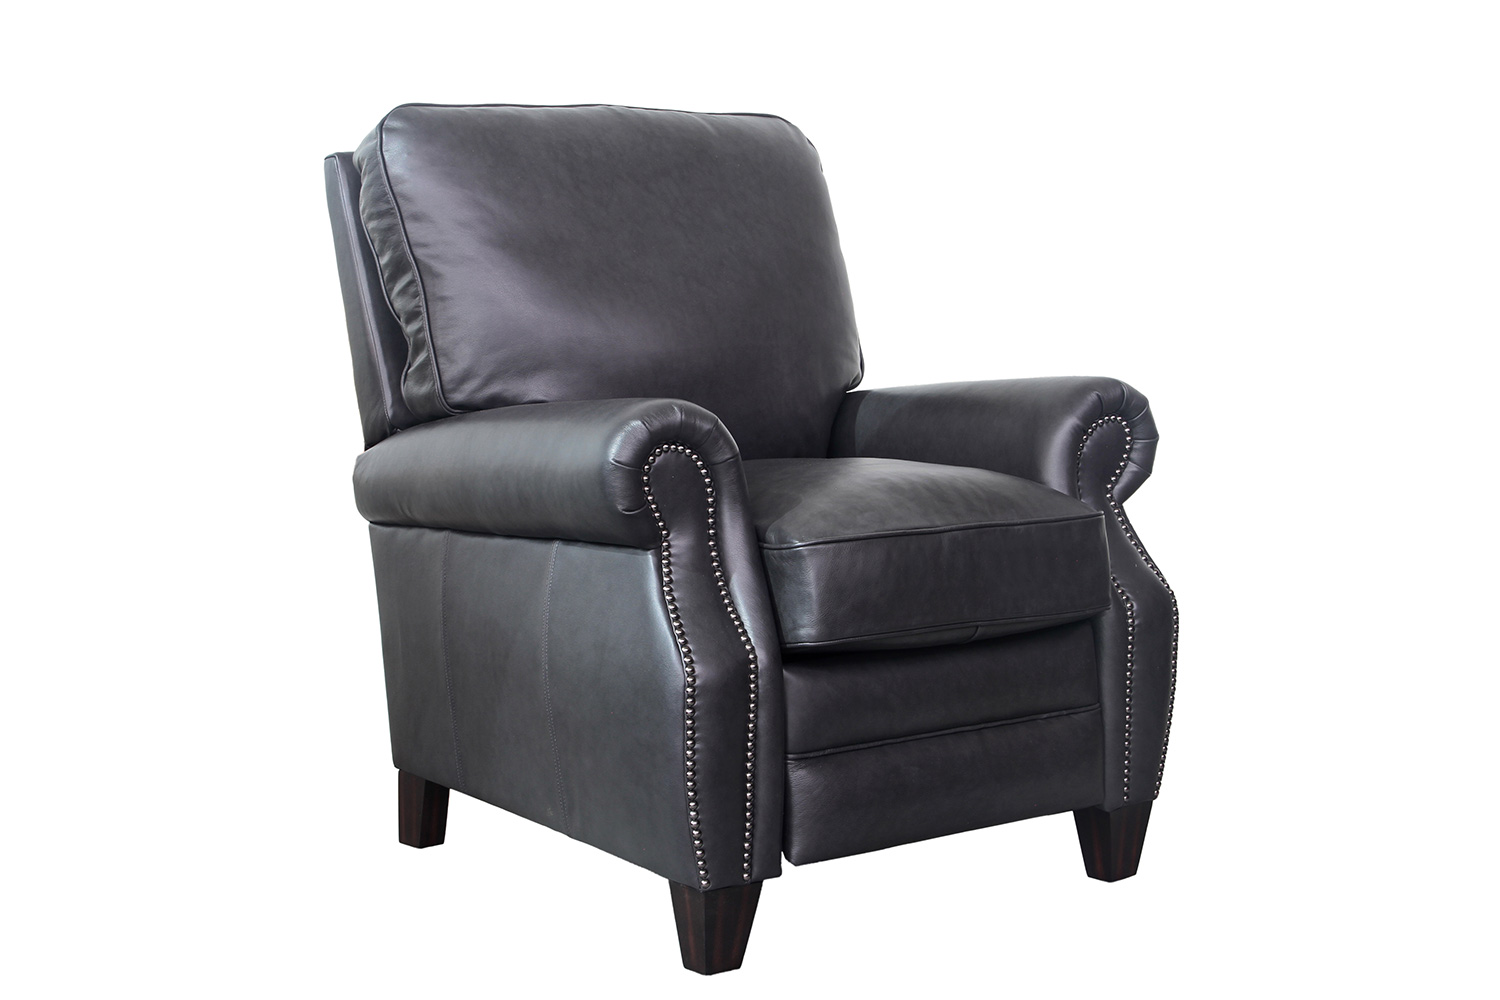 Barcalounger Briarwood Recliner Chair - Shoreham Gray/All Leather